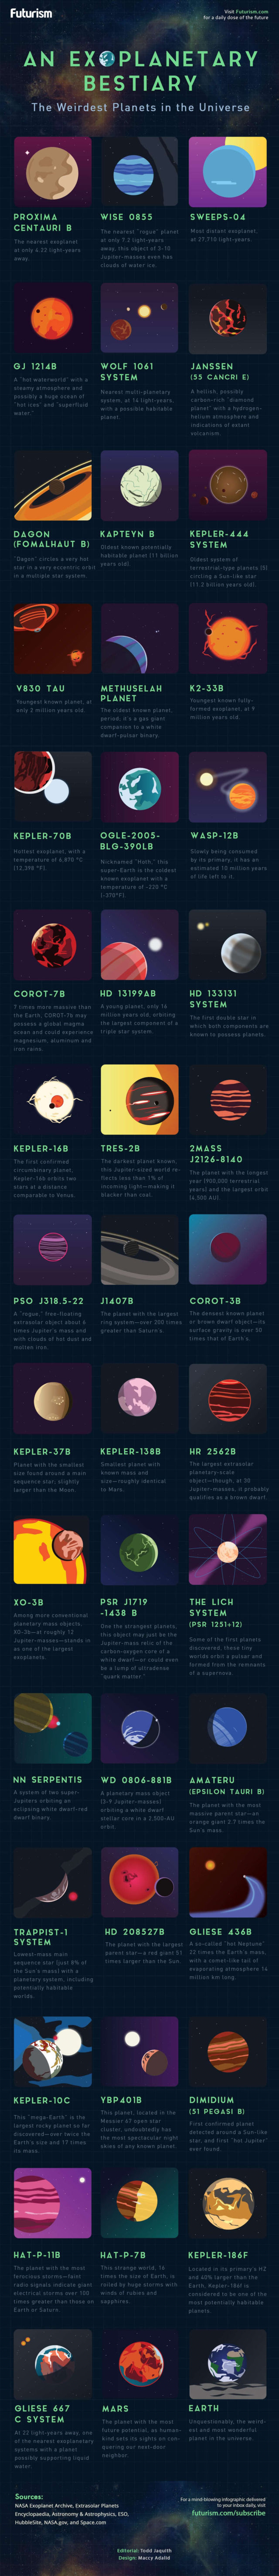 The weird Exoplanets in our nearby Universe